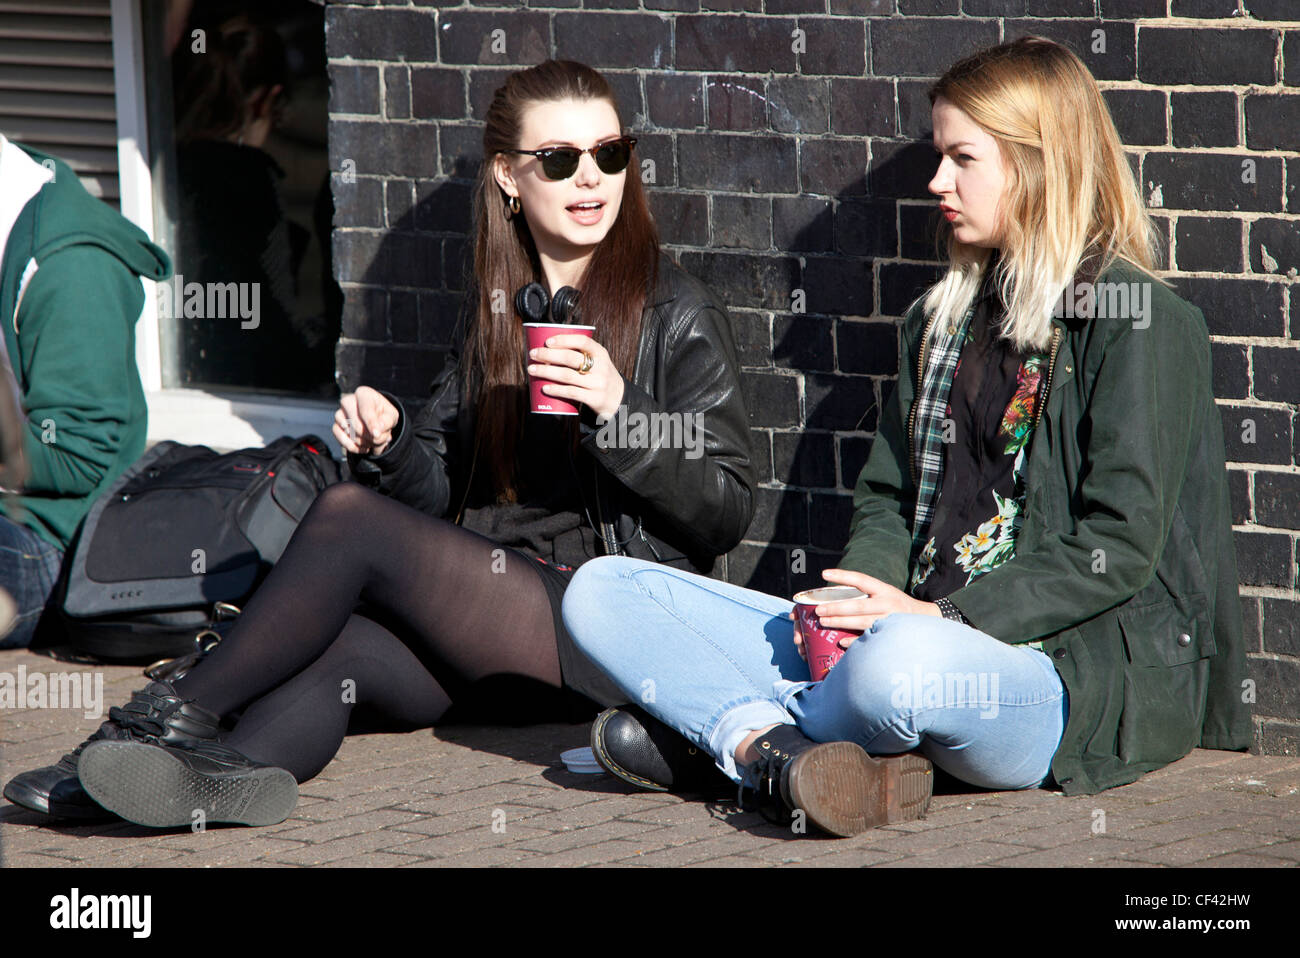 Portrait of two young women talking, drinking and sitting the pavement, London, England, UK. Stock Photo